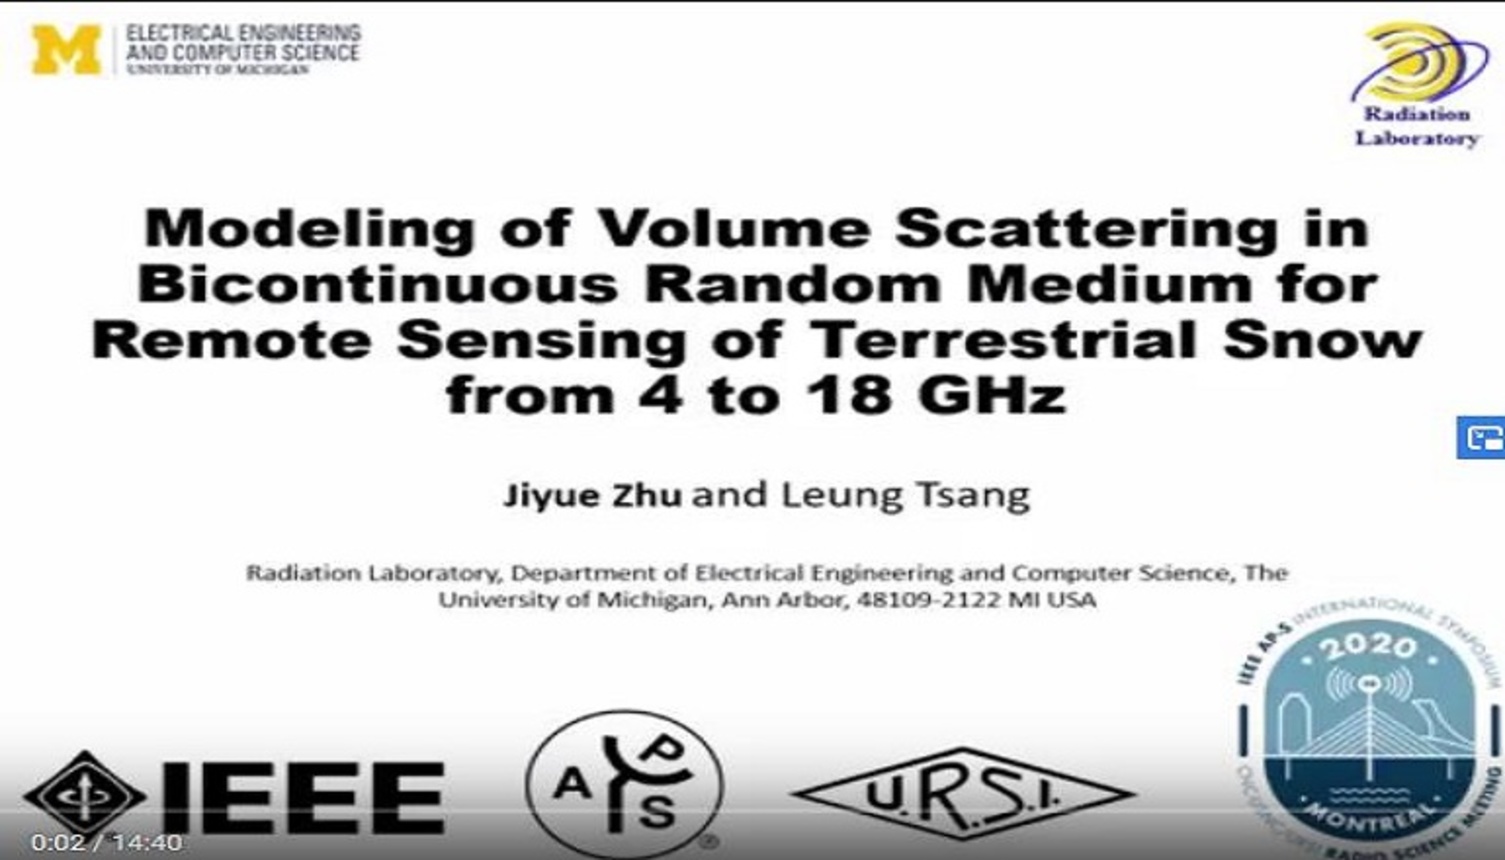 Modeling of Volume Scattering in Discontinuous Random Medium for Remote Sensing of Terrestrial Snow from 4 to 18 GHz Video